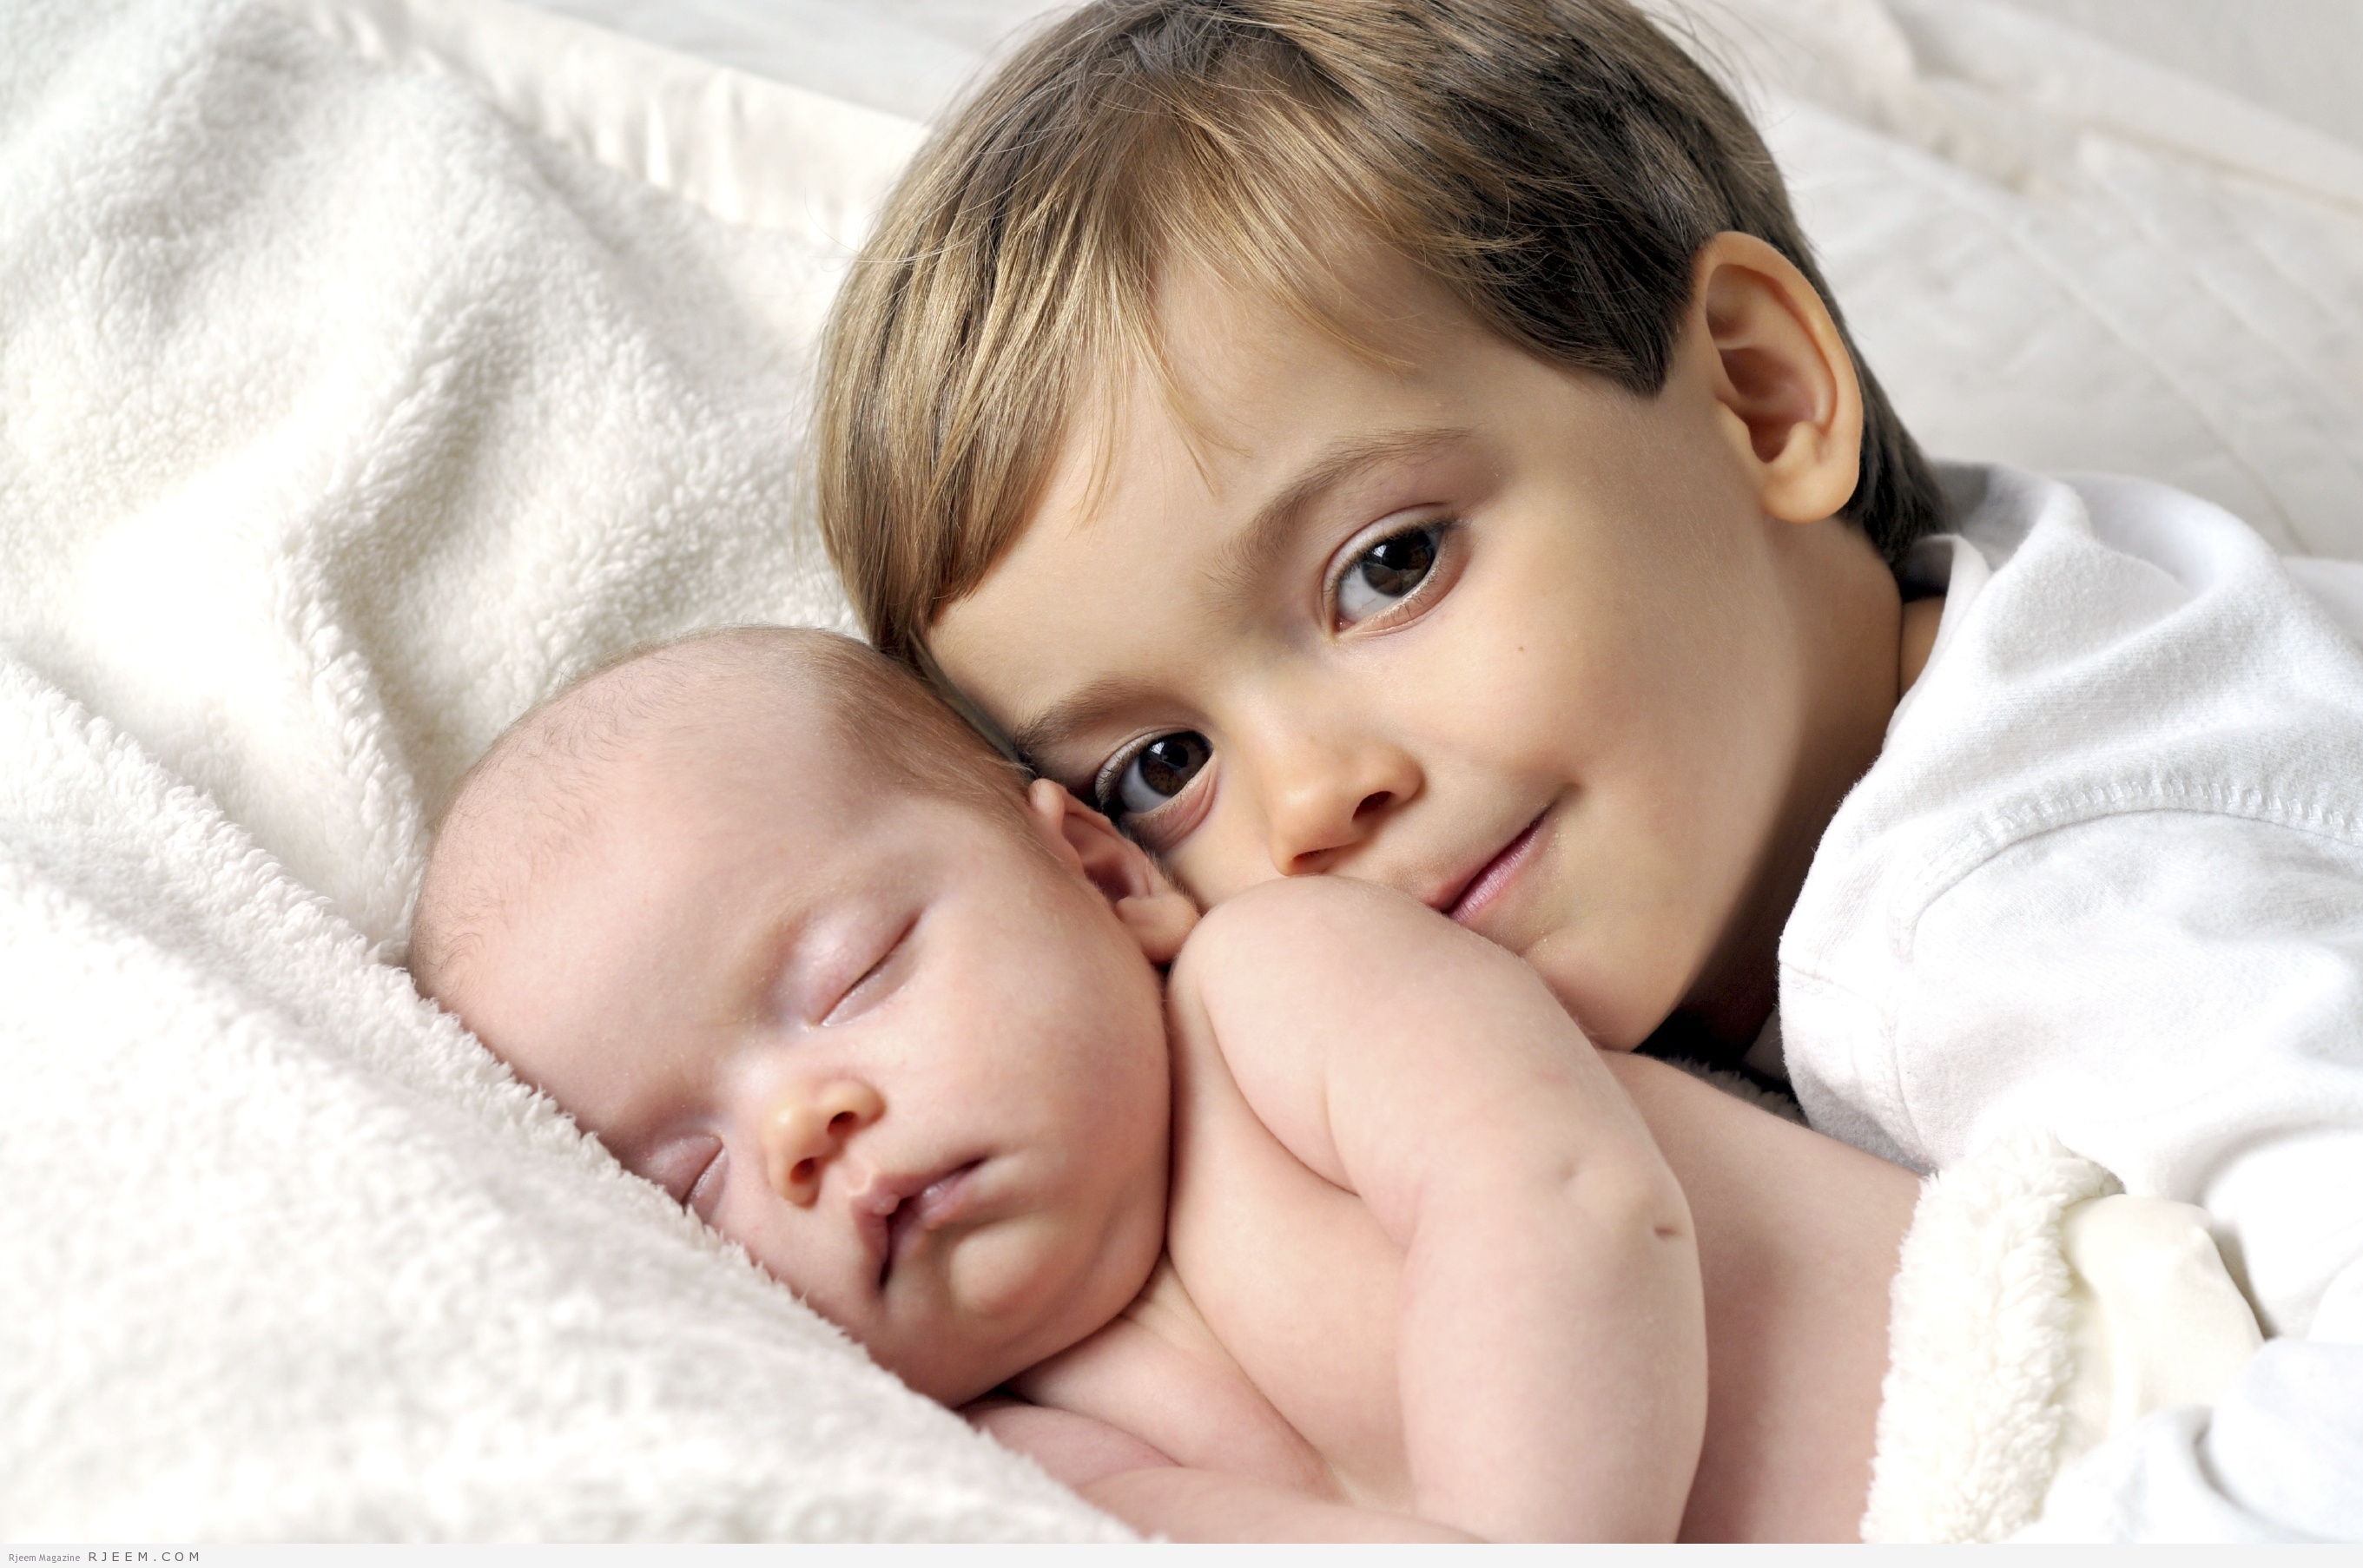 newborn, infant, innocent, beauty, asleep, white, loving, adorable, family, brother, sibling, mother, peaceful, candid